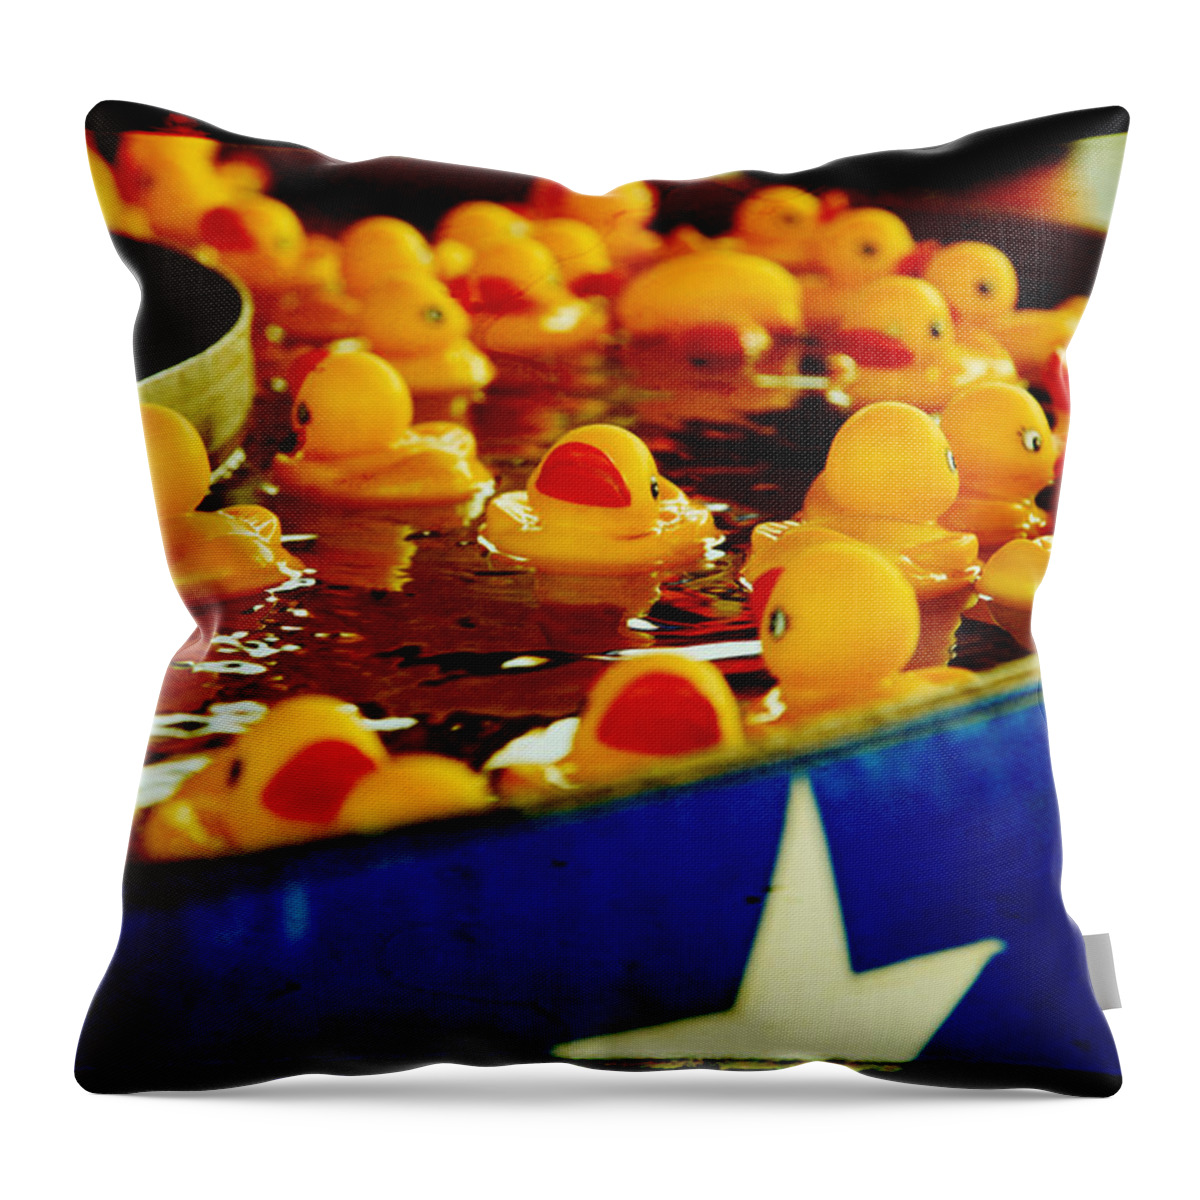 Rubber Ducks Throw Pillow featuring the photograph Just Ducky by Toni Hopper